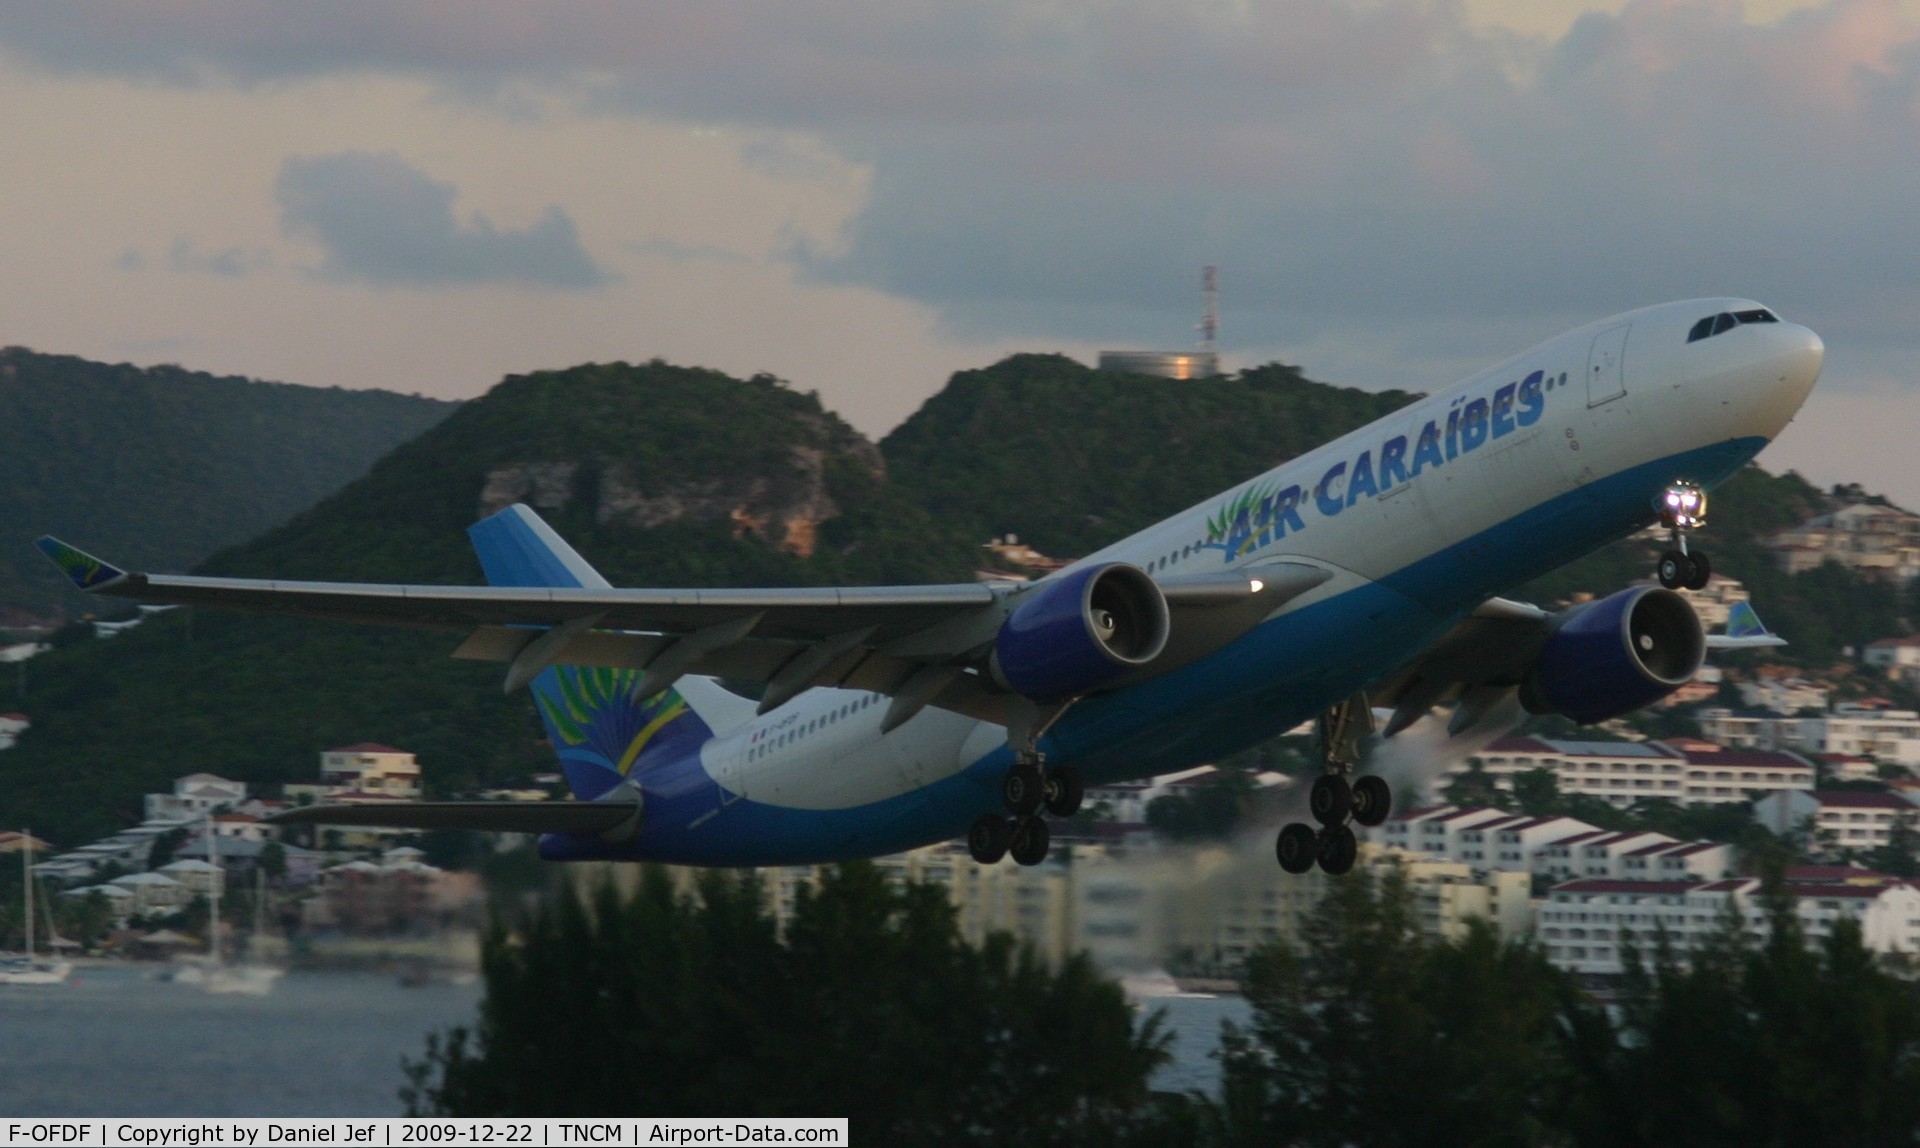 F-OFDF, 1999 Airbus A330-223 C/N 253, Air caraibes departing late afternoon on runway 28